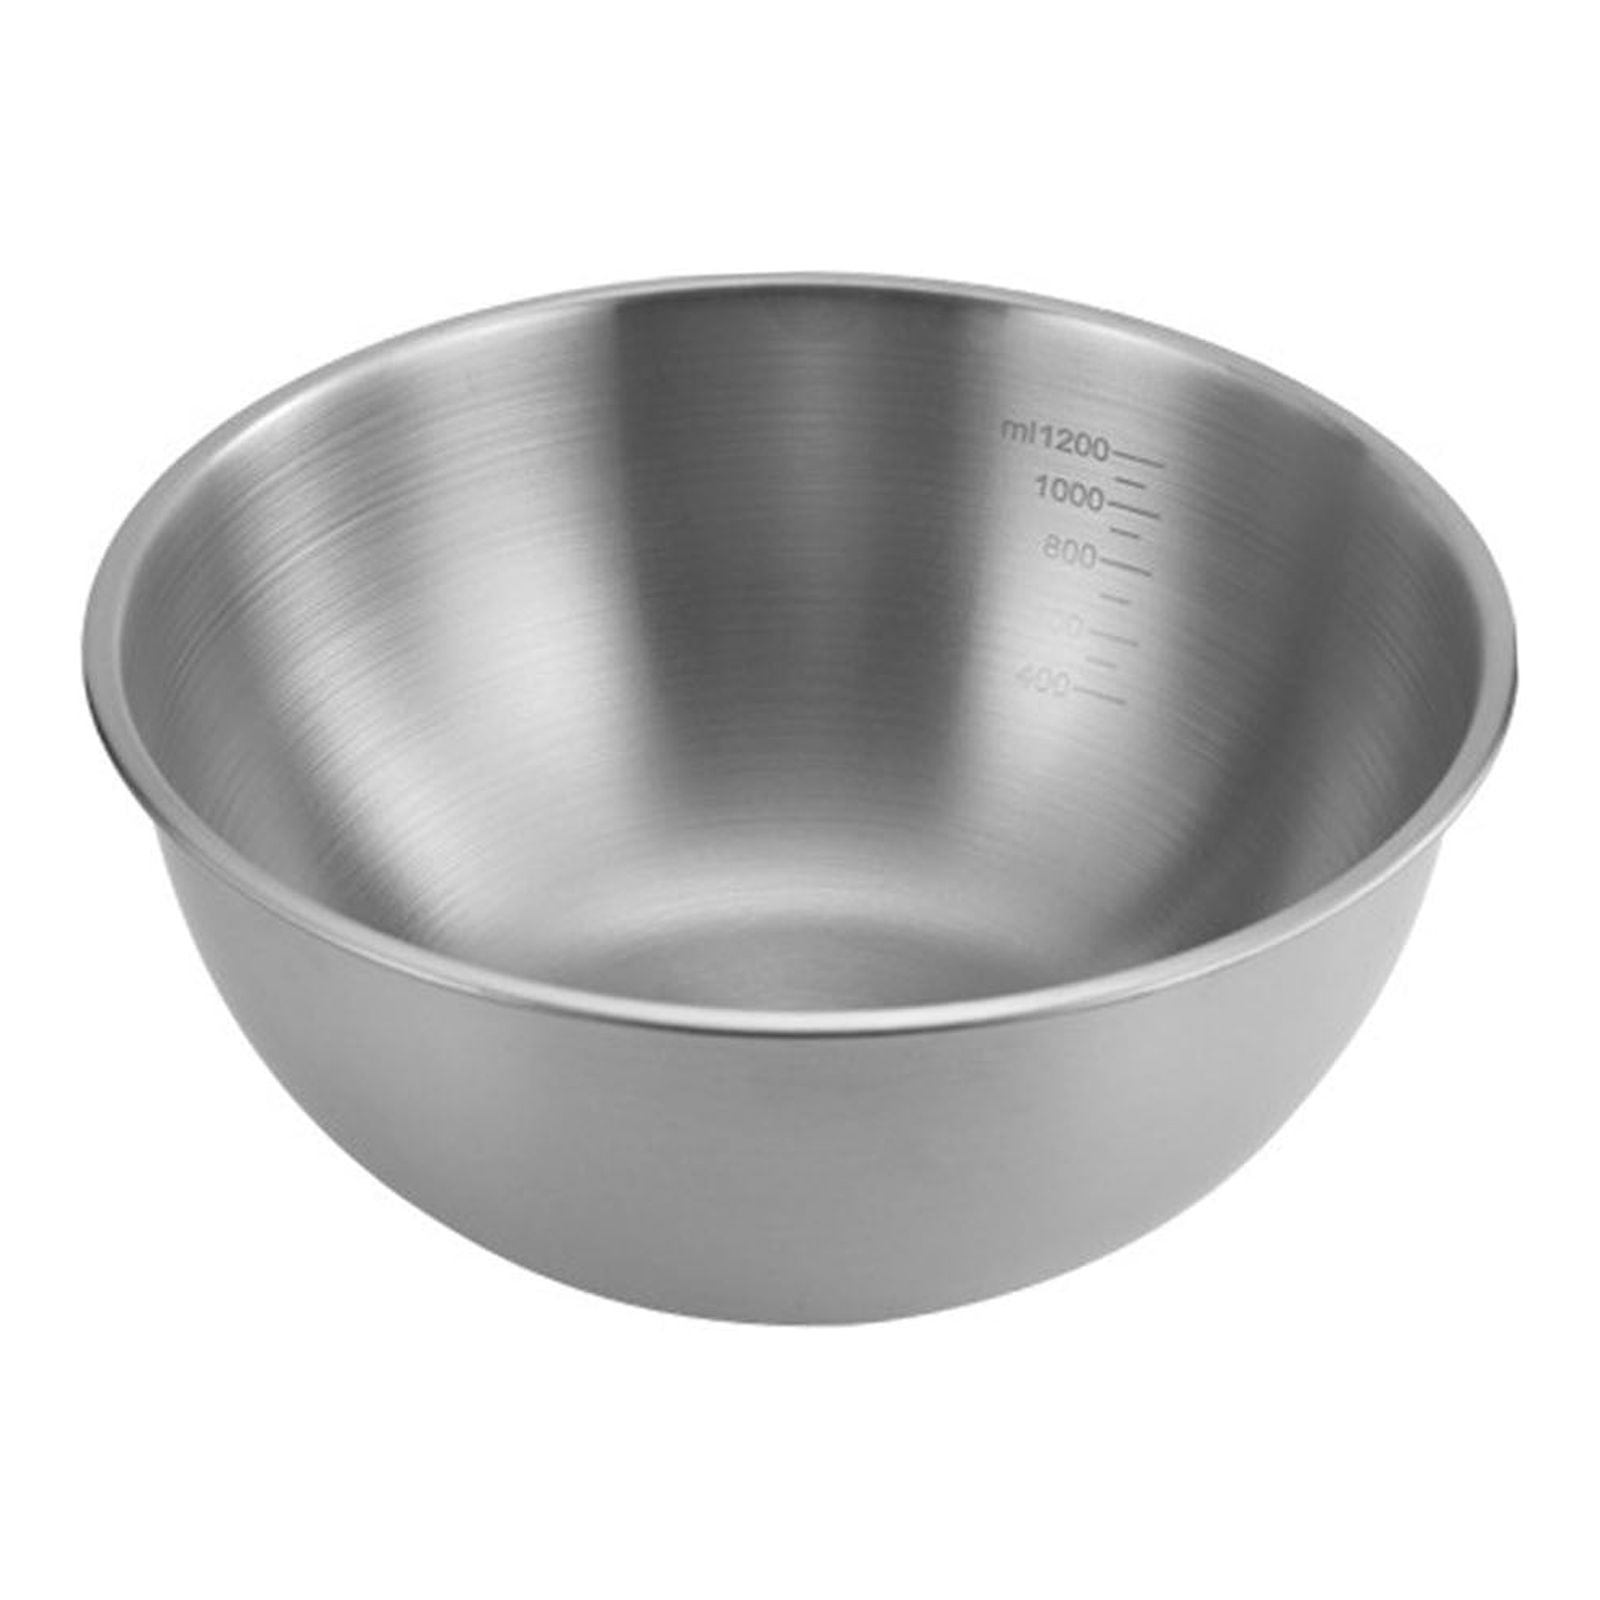 304 Stainless Steel Bowls Set Basin Kitchen Thicken Salad Mixing Bowl With  Cover Egg Vegetable Bowl Tableware Kitchenware